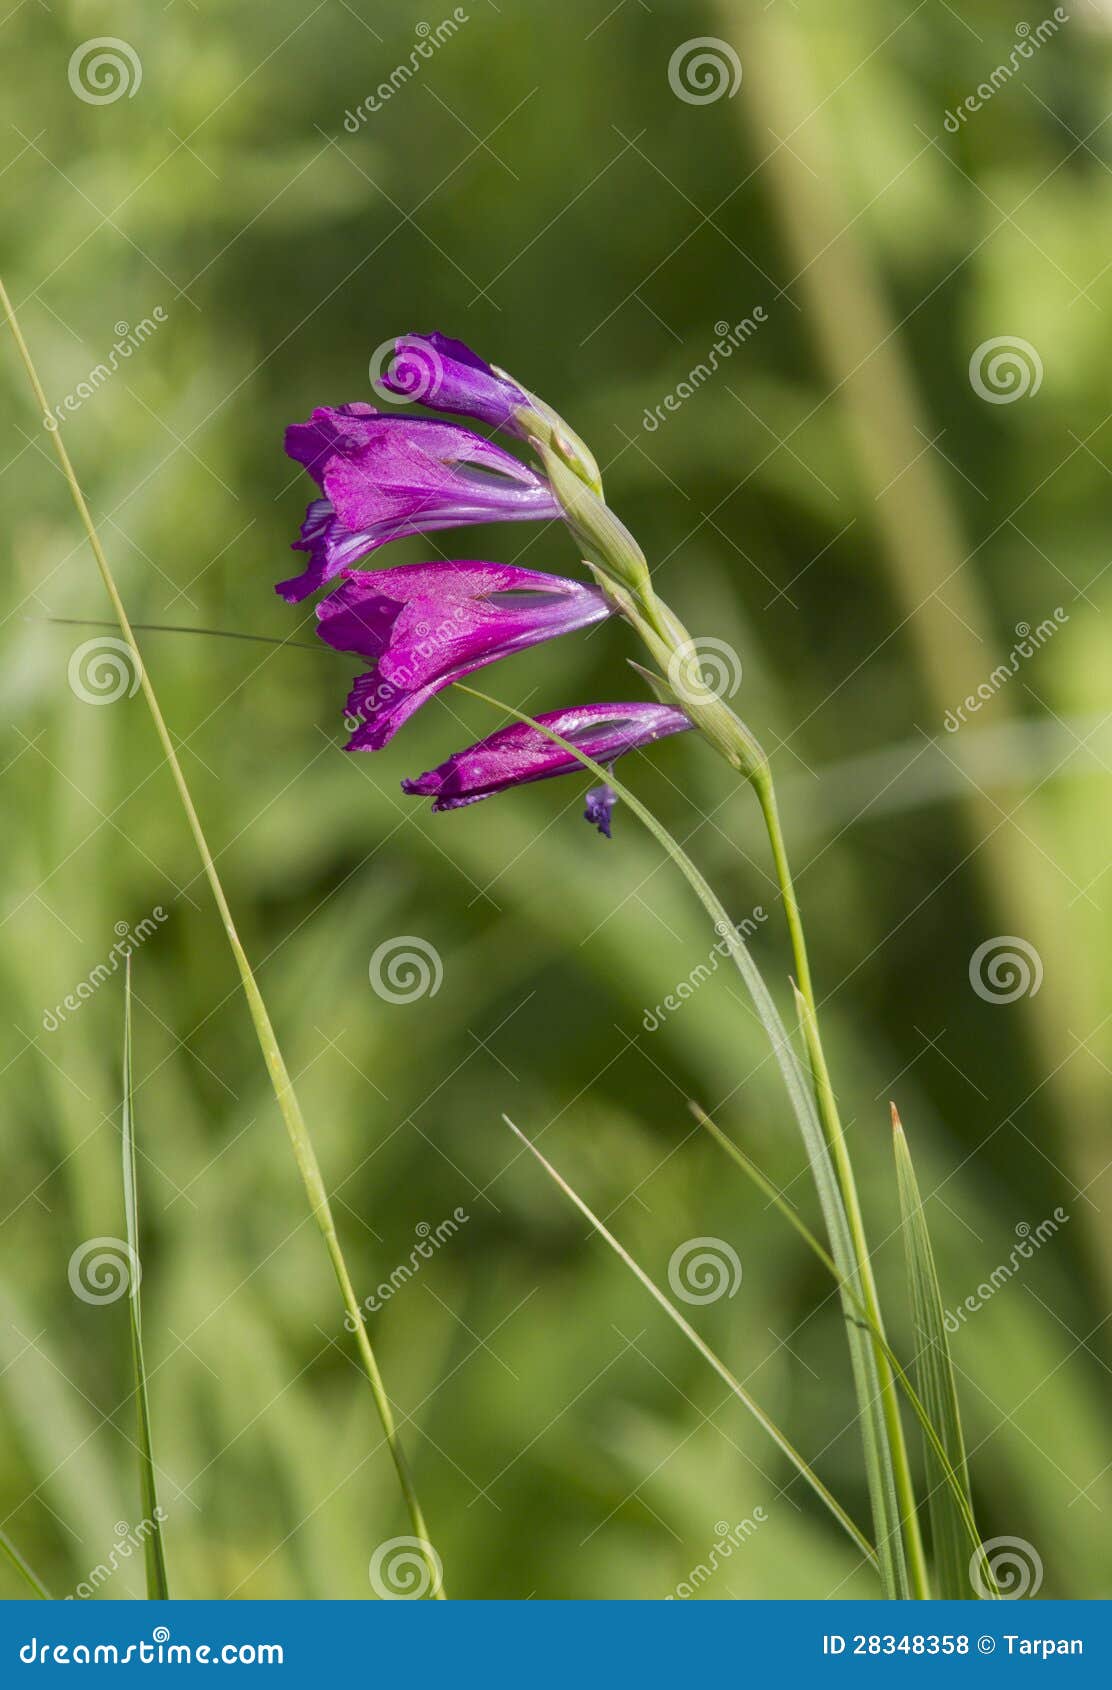 gladiolus imbricate on spring meadow.